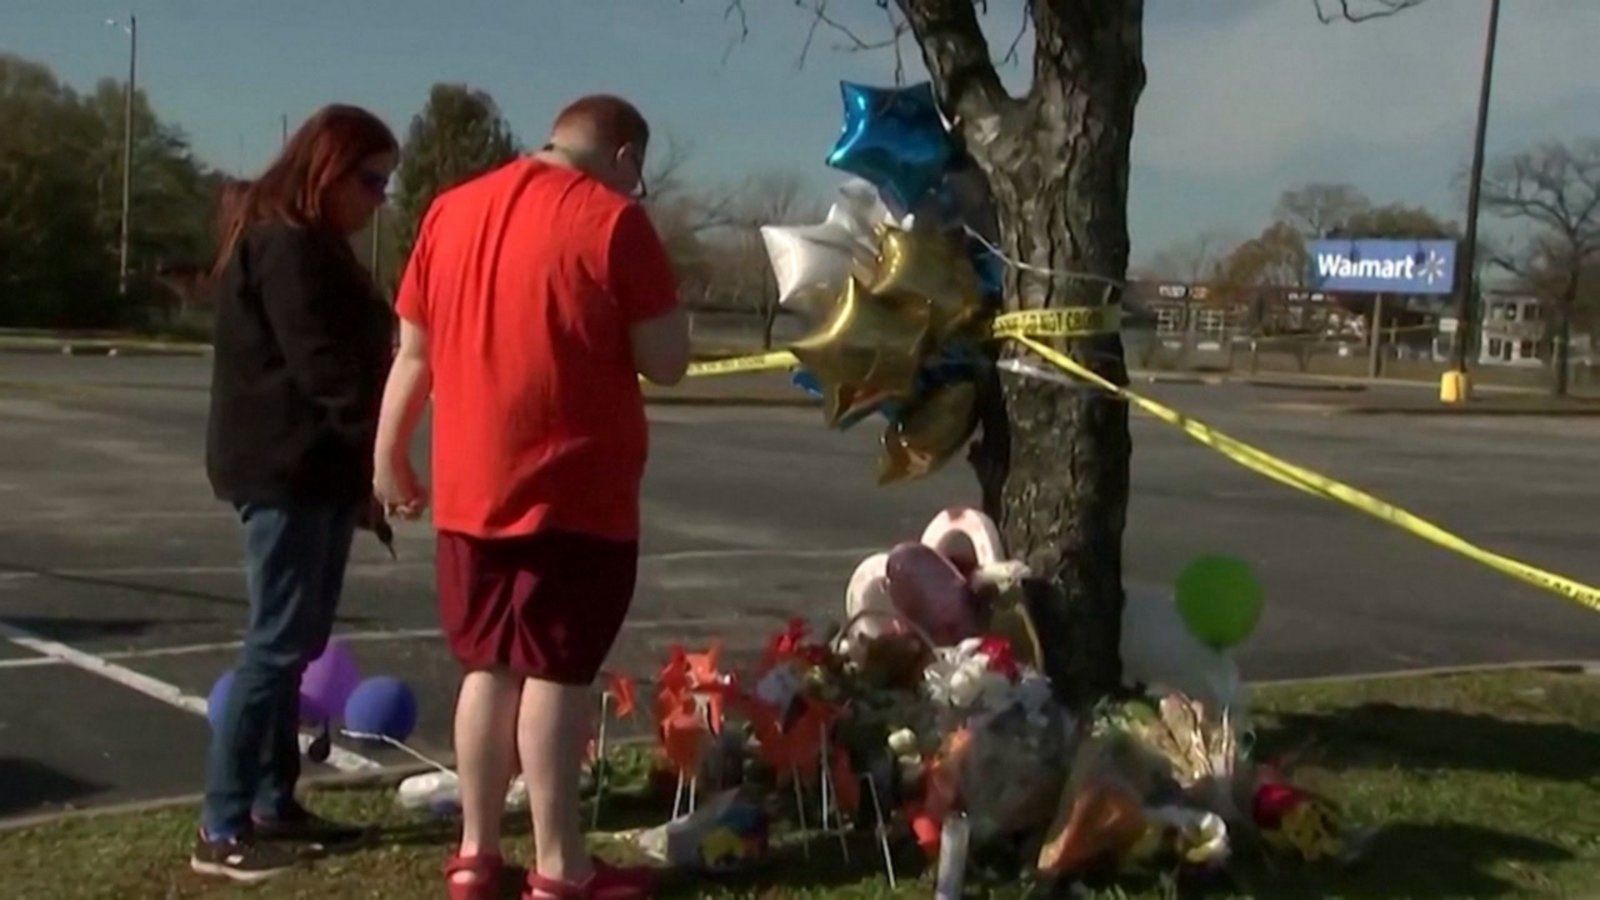 New Details About The Deadly Mass Shooting At A Walmart In Chesapeake